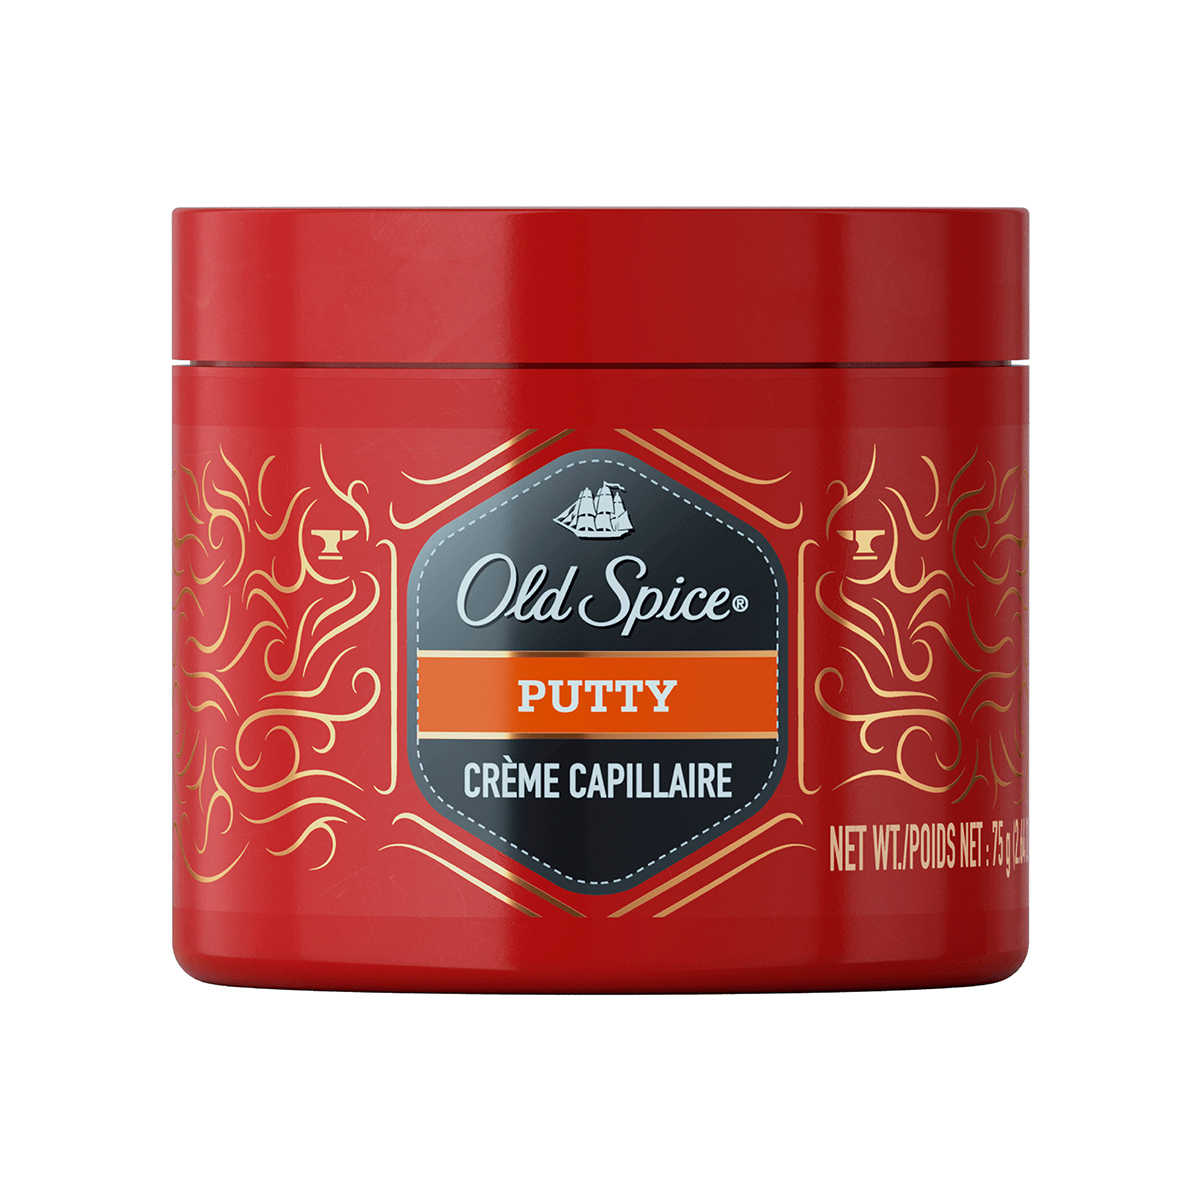 Old Spice Forge Putty - Pomada Capilar 75g